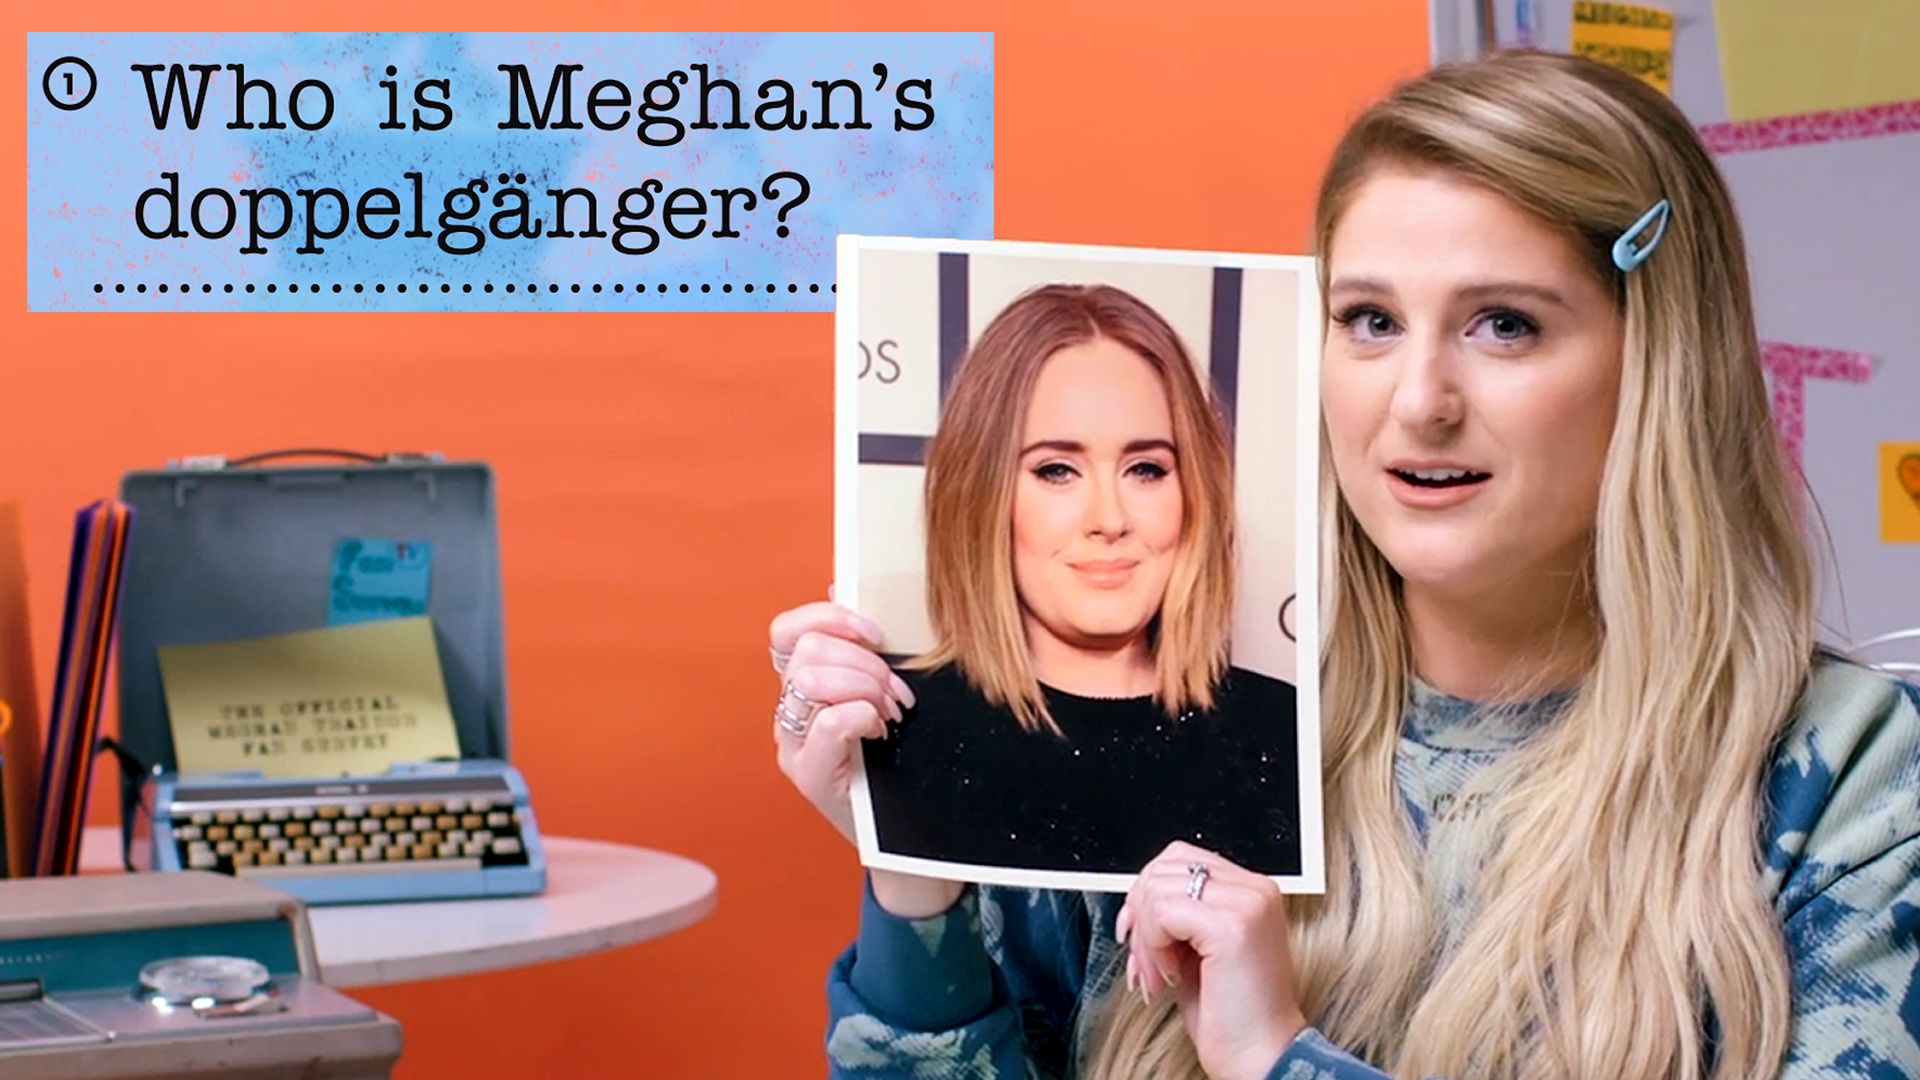 Check Out Latest English Official Music Video Song 'Made You Look (Again)'  Sung By Meghan Trainor